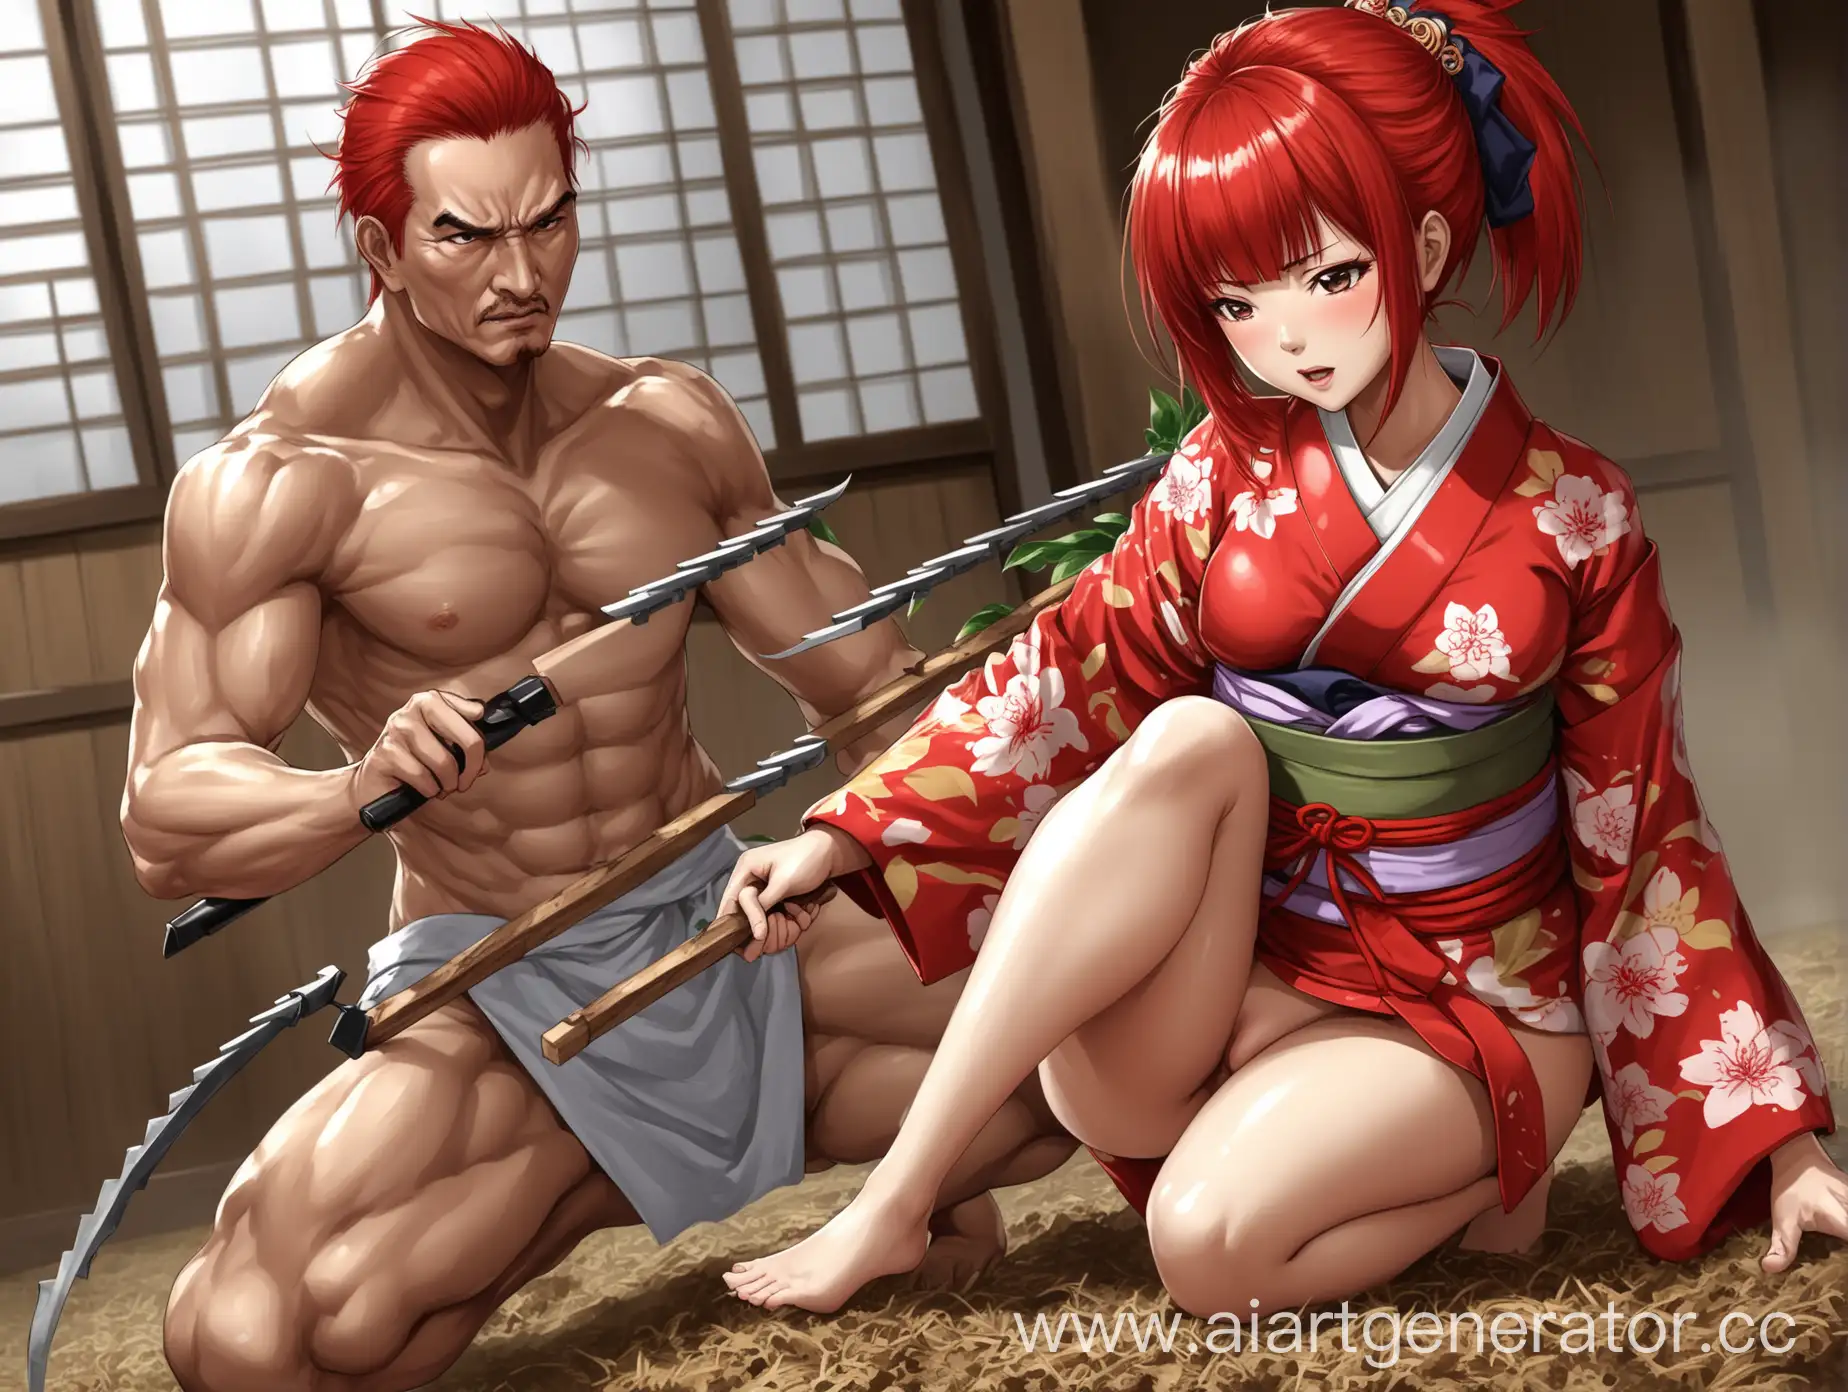 Asian-Girl-Master-Combat-Artist-in-Red-Kimono-with-Stunning-Red-Hair